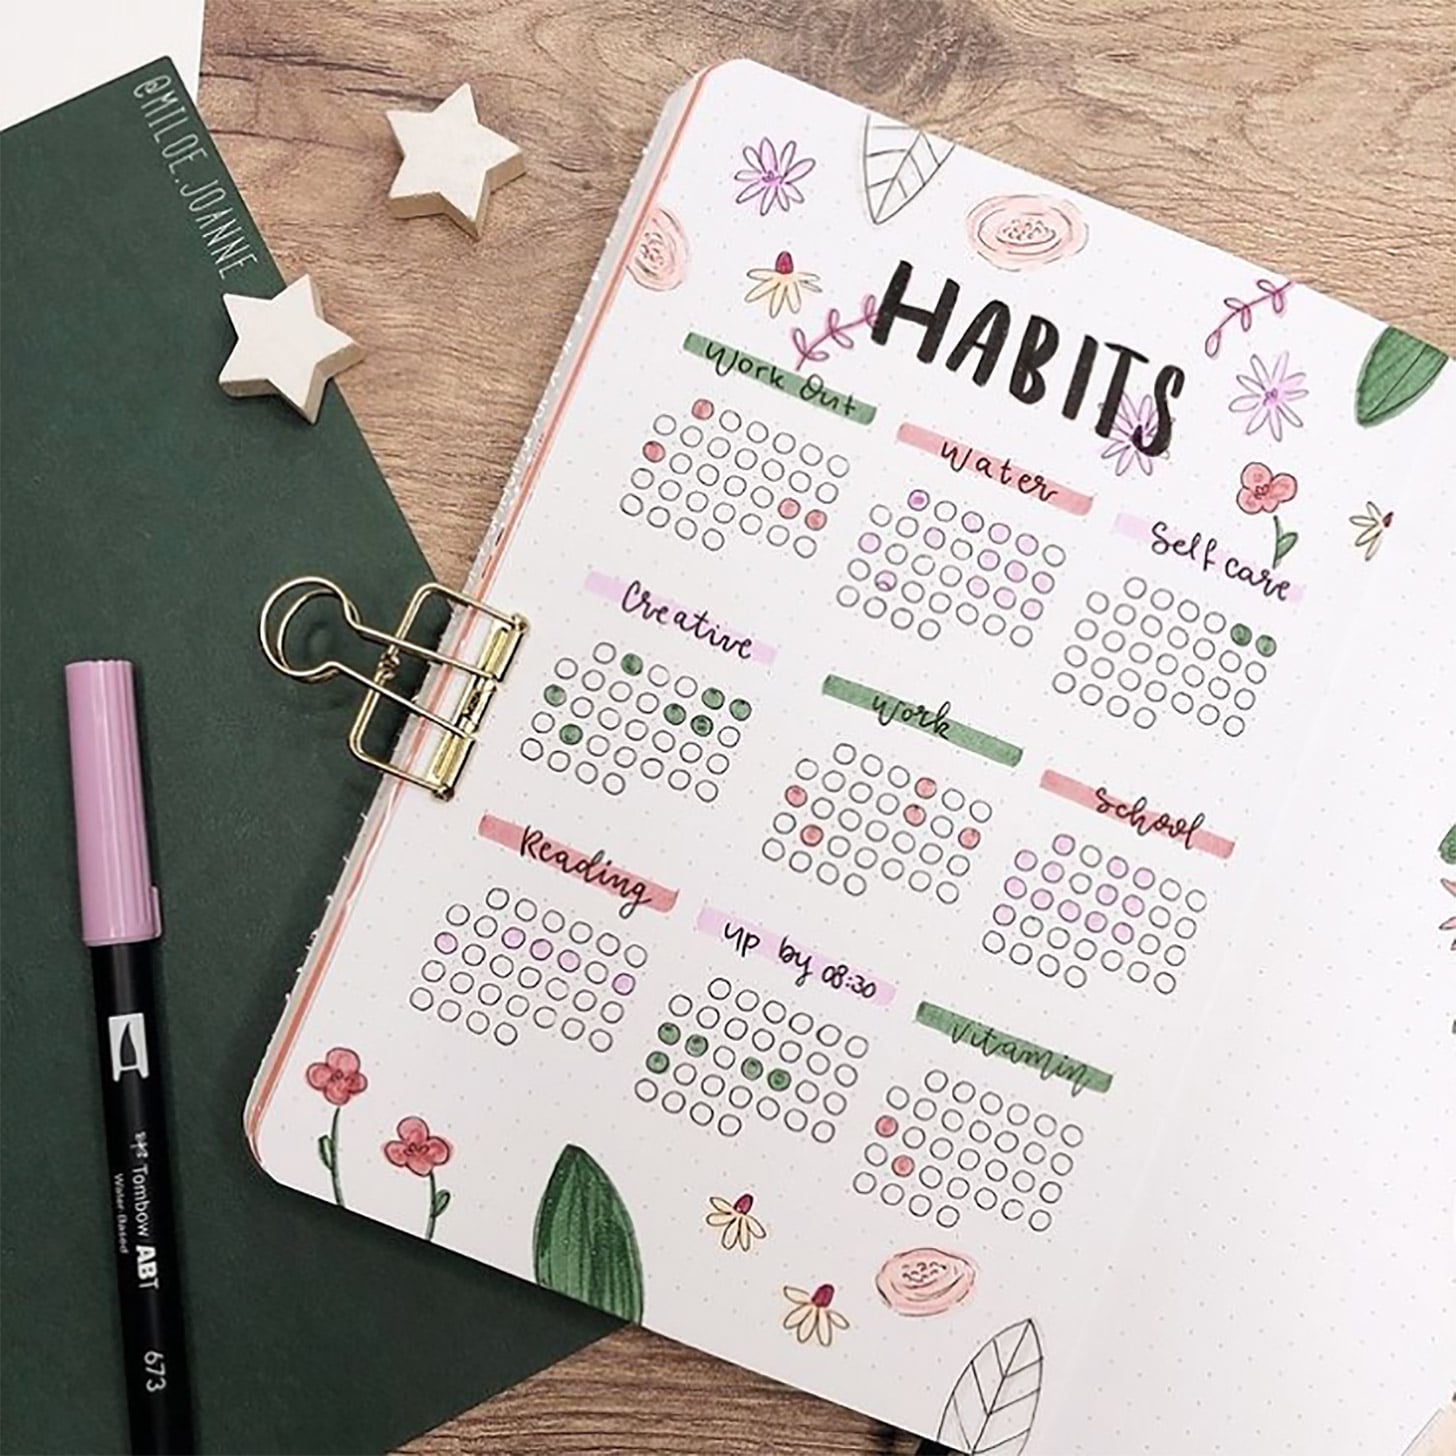 Paper & Party Supplies Calendars & Planners General Habit Tracker Paper ...